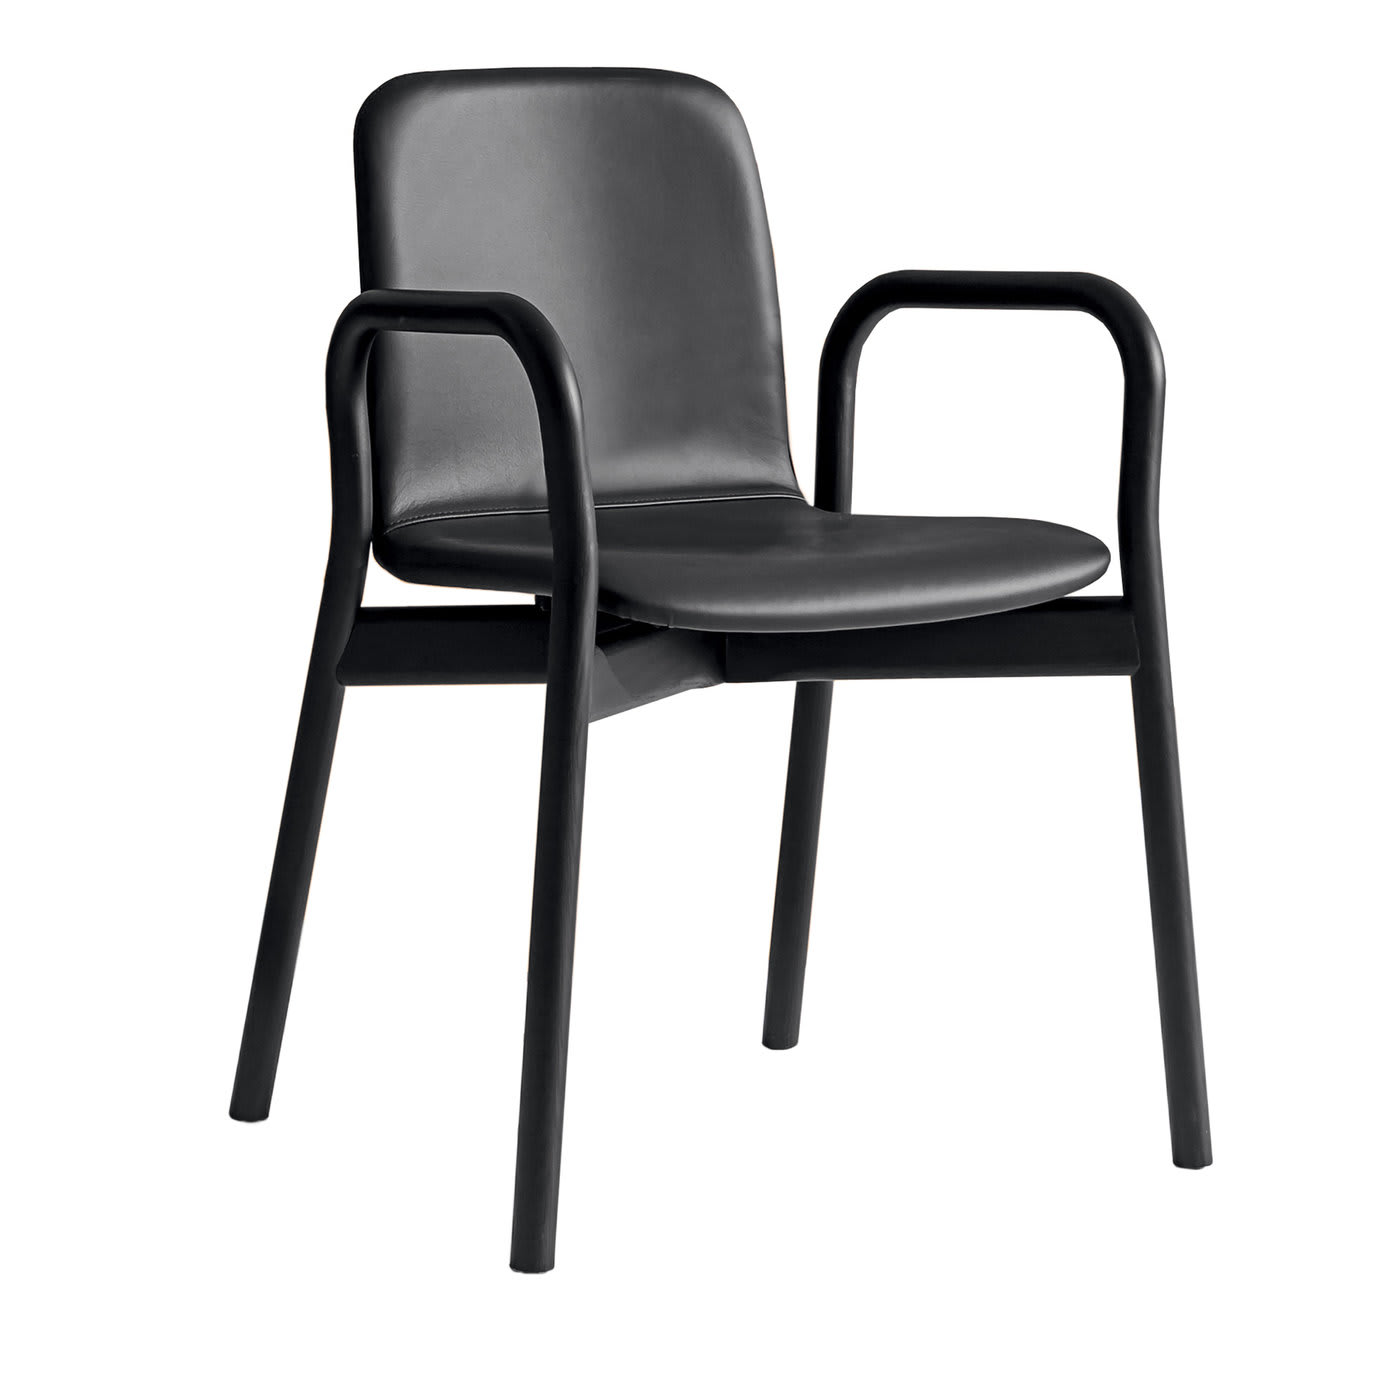 Two Tone Black Leather Chair - Discipline